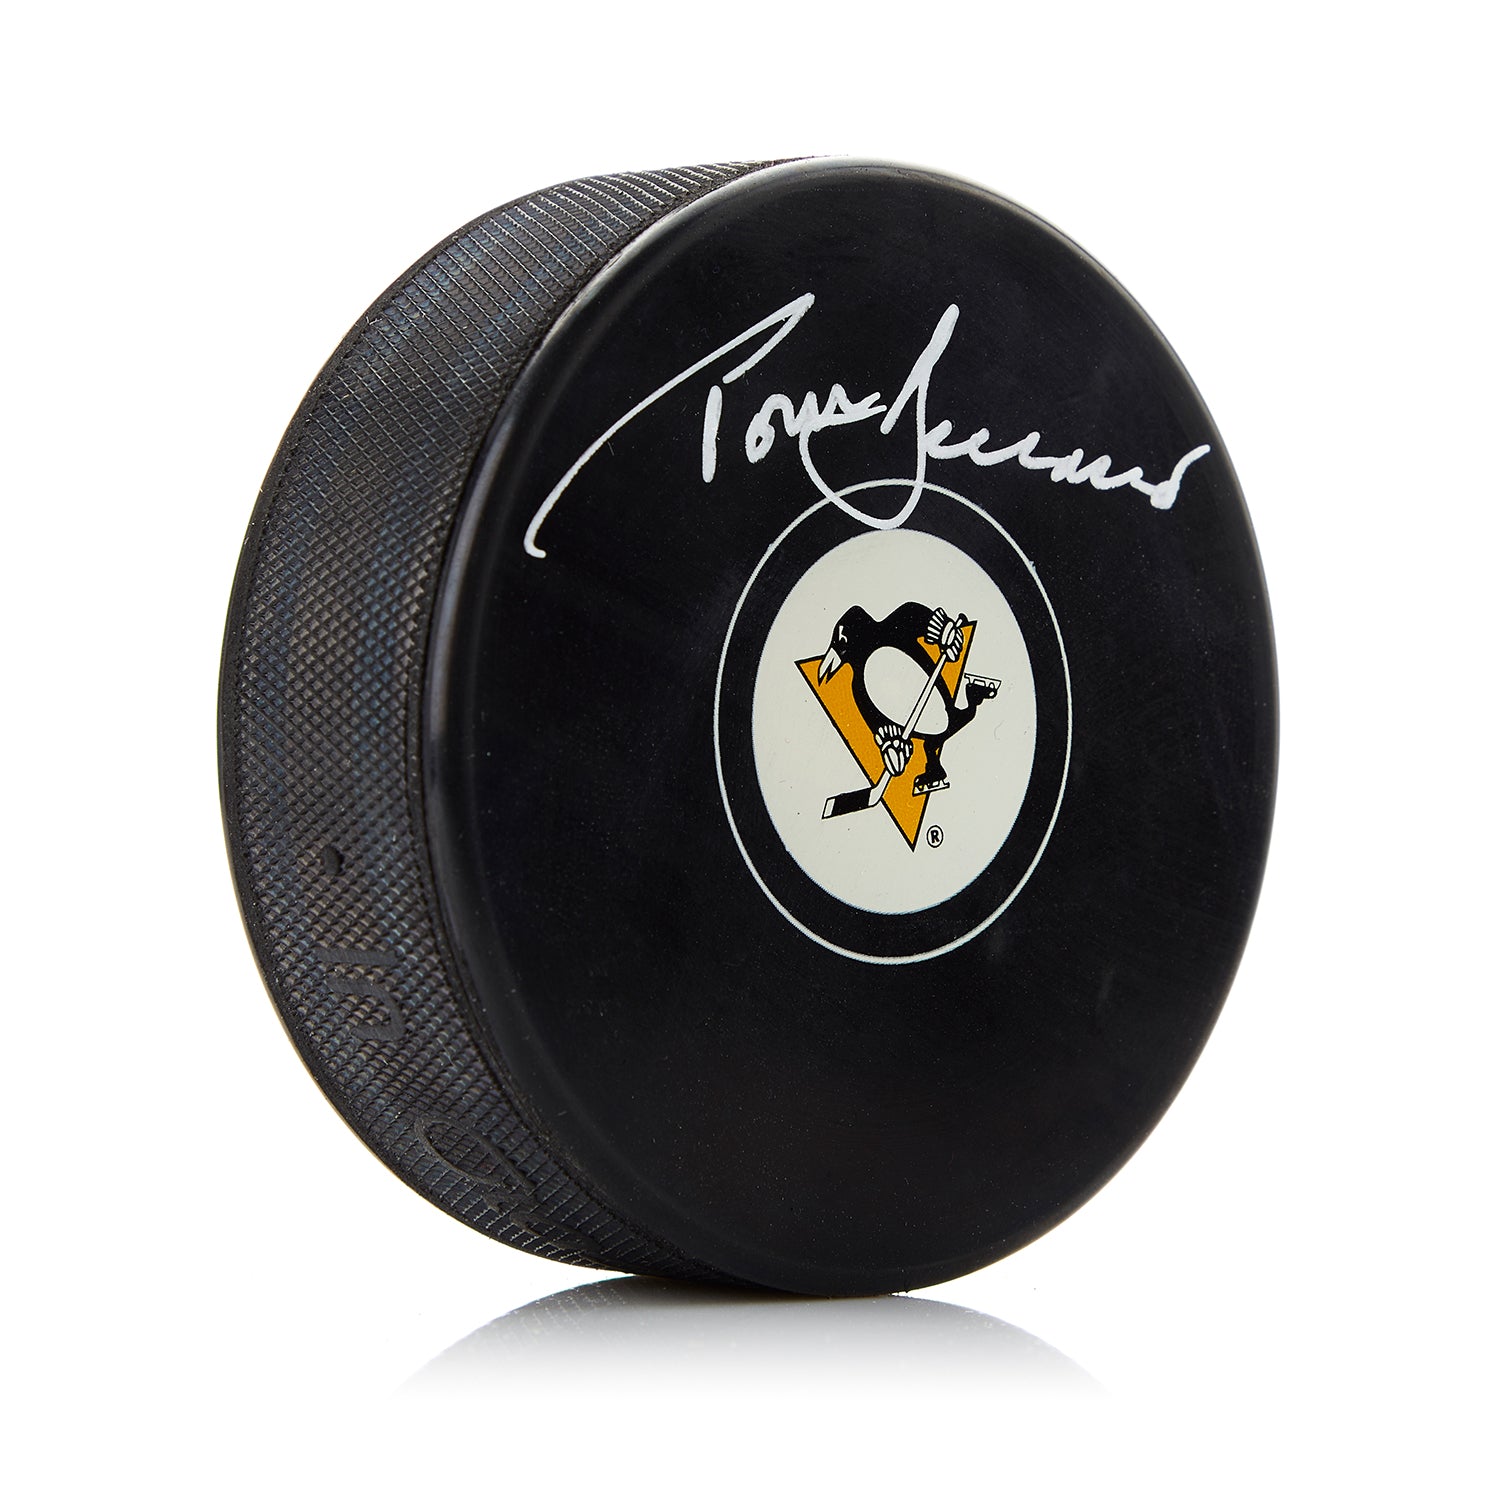 Tom Barrasso Pittsburgh Penguins Autographed Hockey Puck